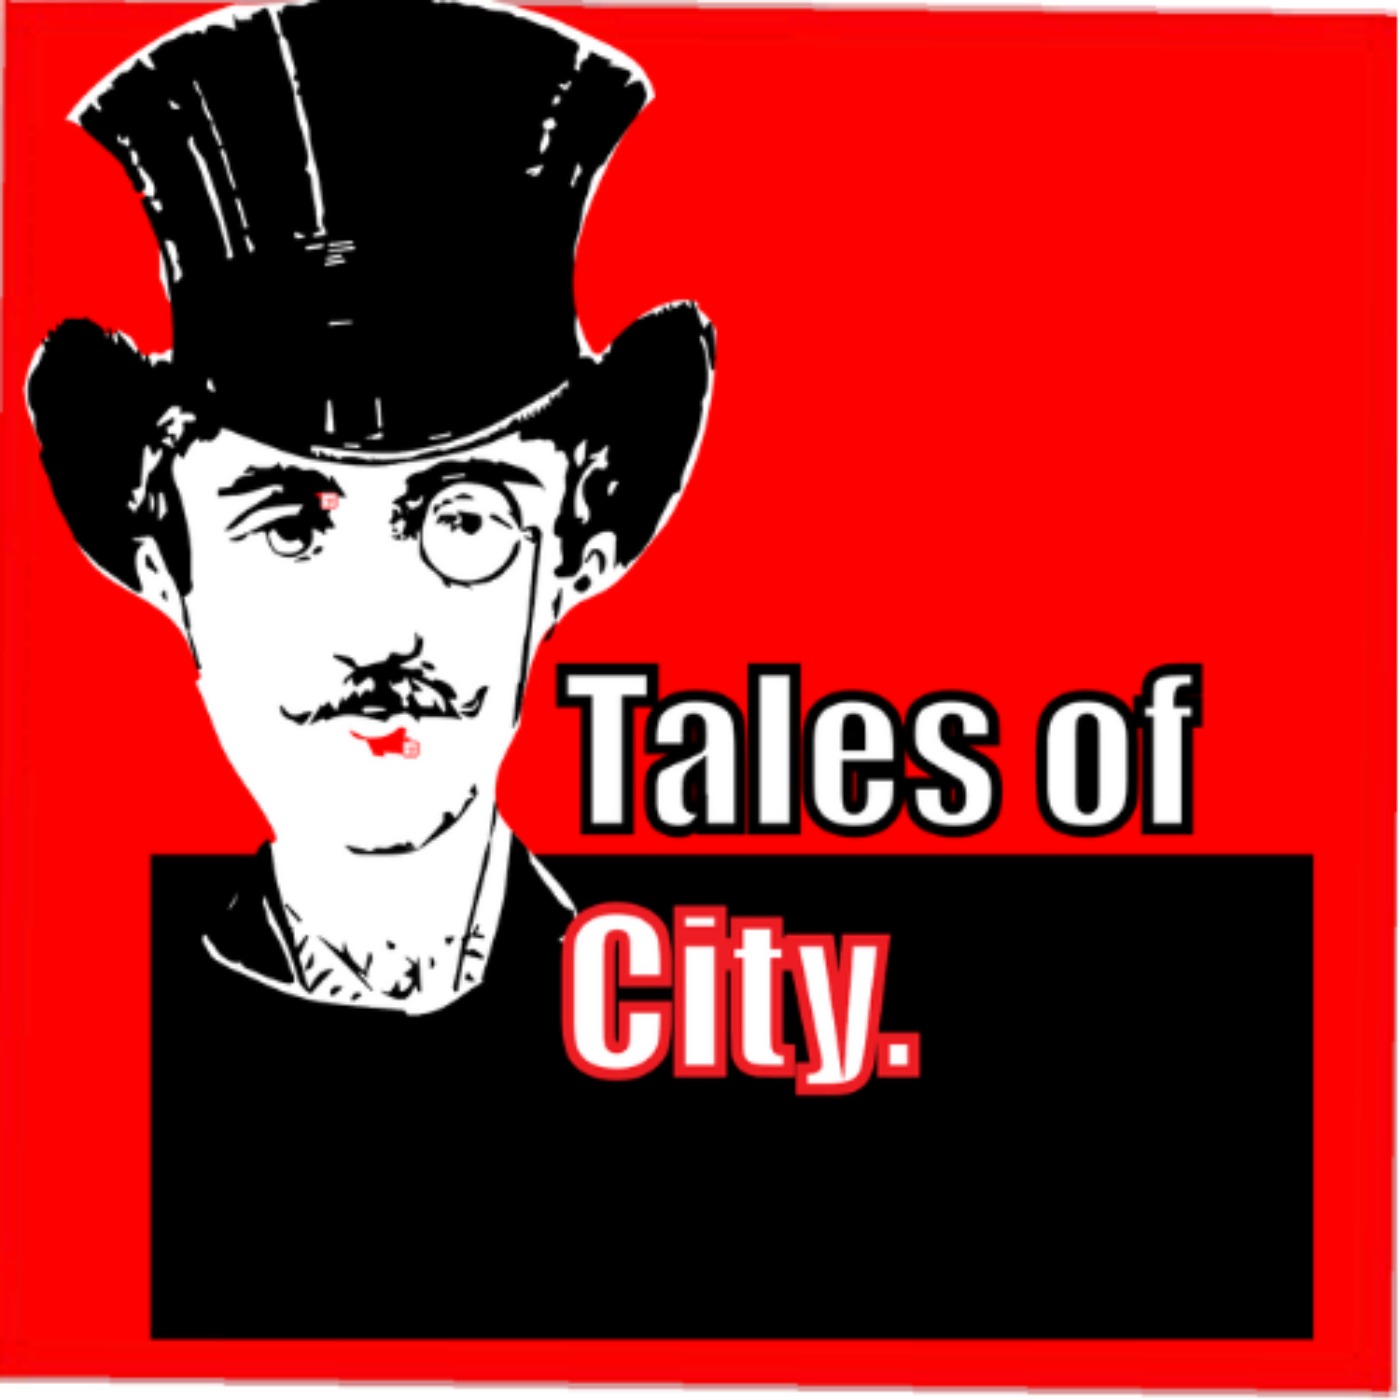 Tales Of City  - "Family is the First Heartbreak"